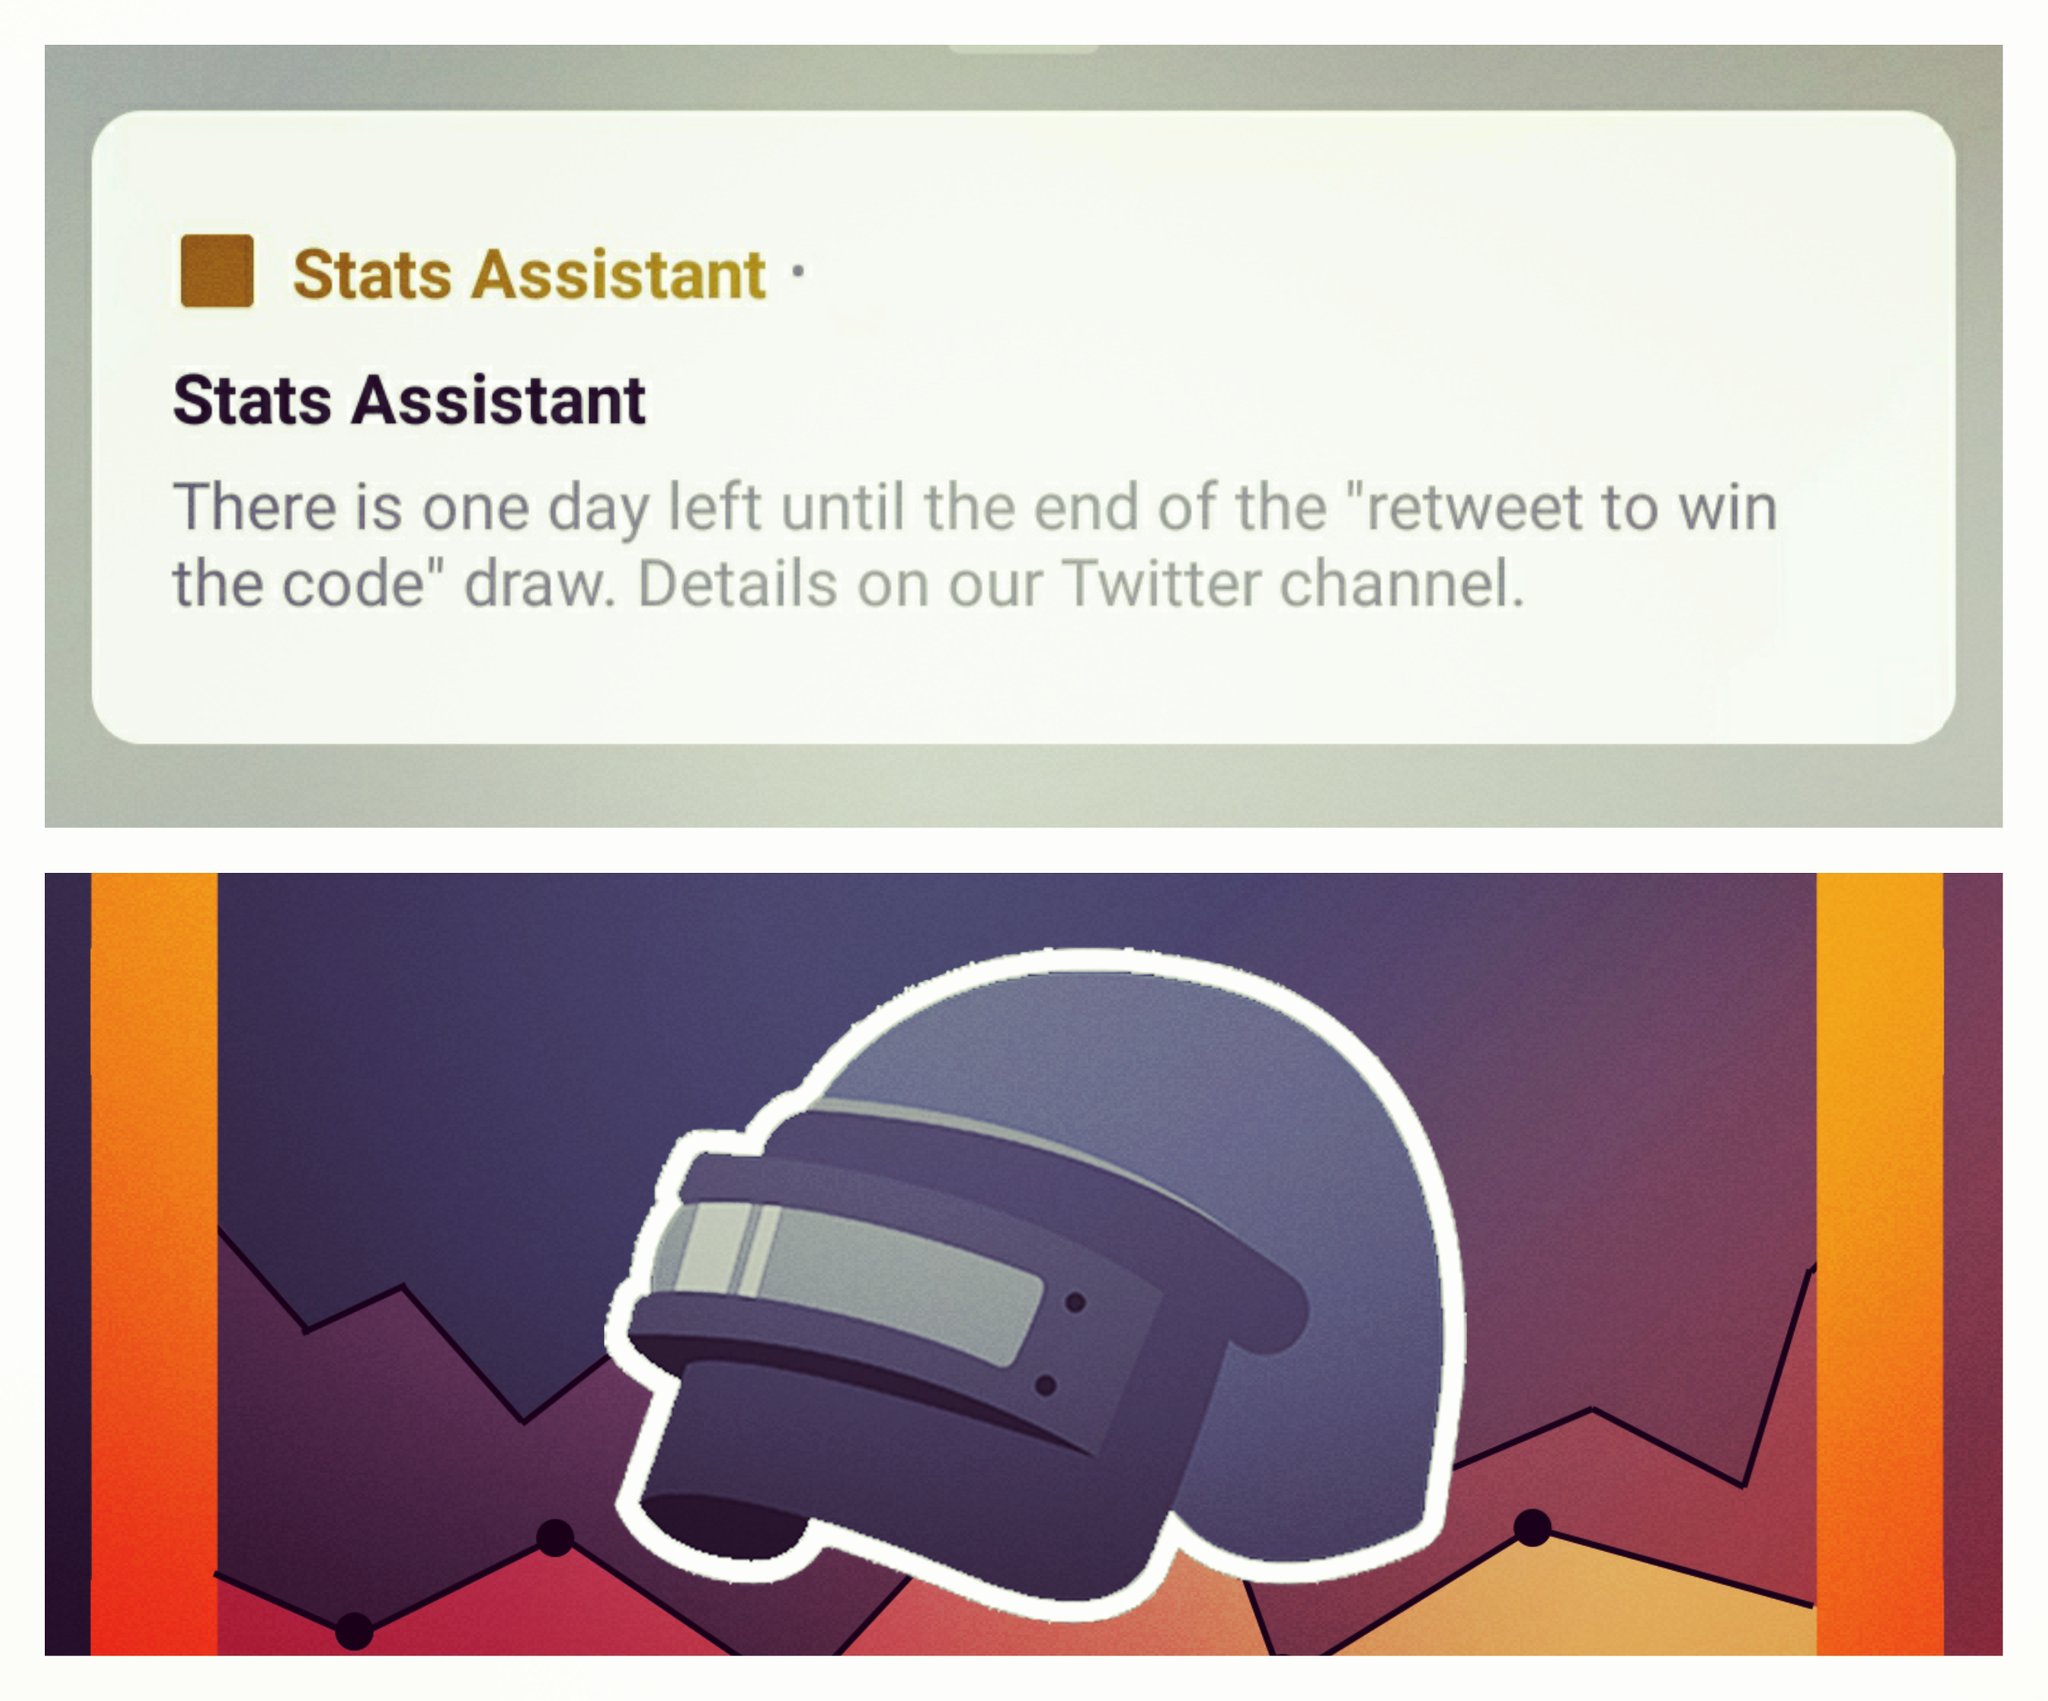 PUBG STATS ASSISTANT for PS4, and (@StatsAssistant) / Twitter